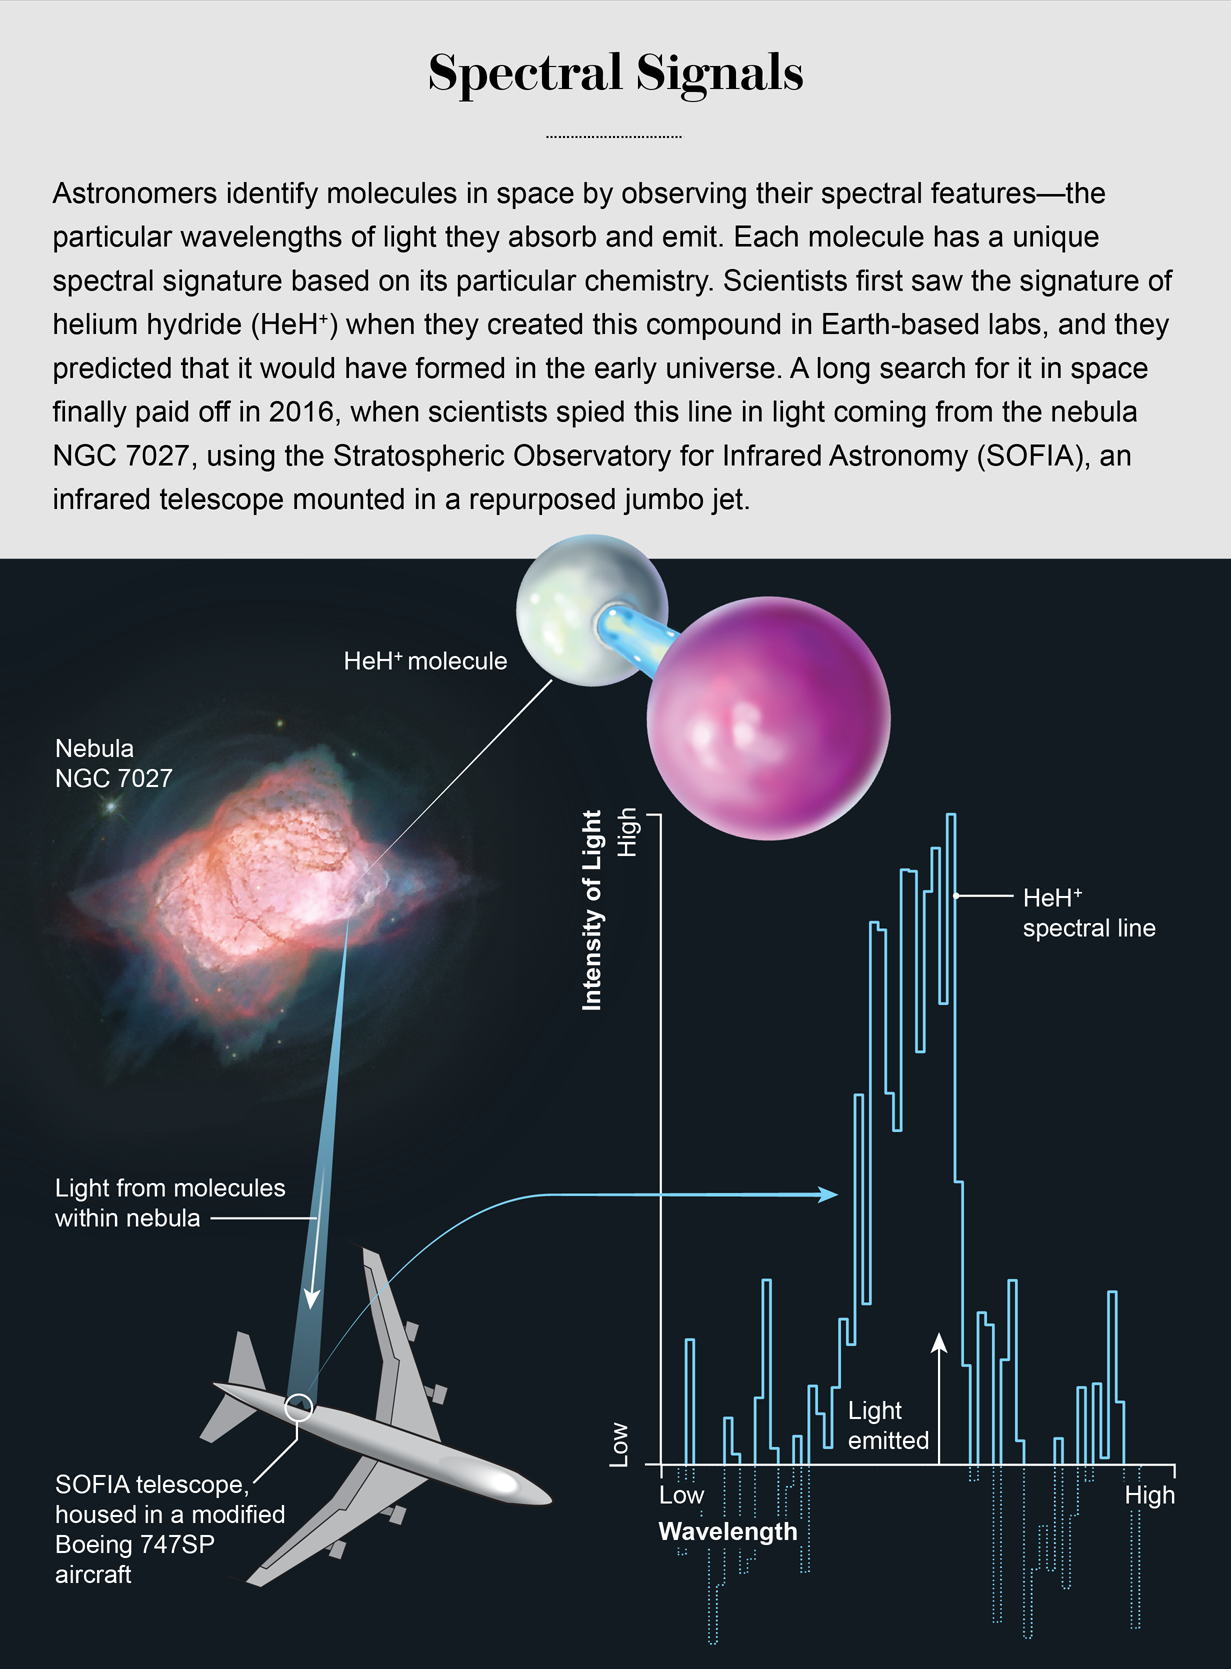 Graphic shows light from helium hydride in Nebula NGC 7027 entering the SOFIA telescope, alongside a chart of the molecule’s unique spectral signature